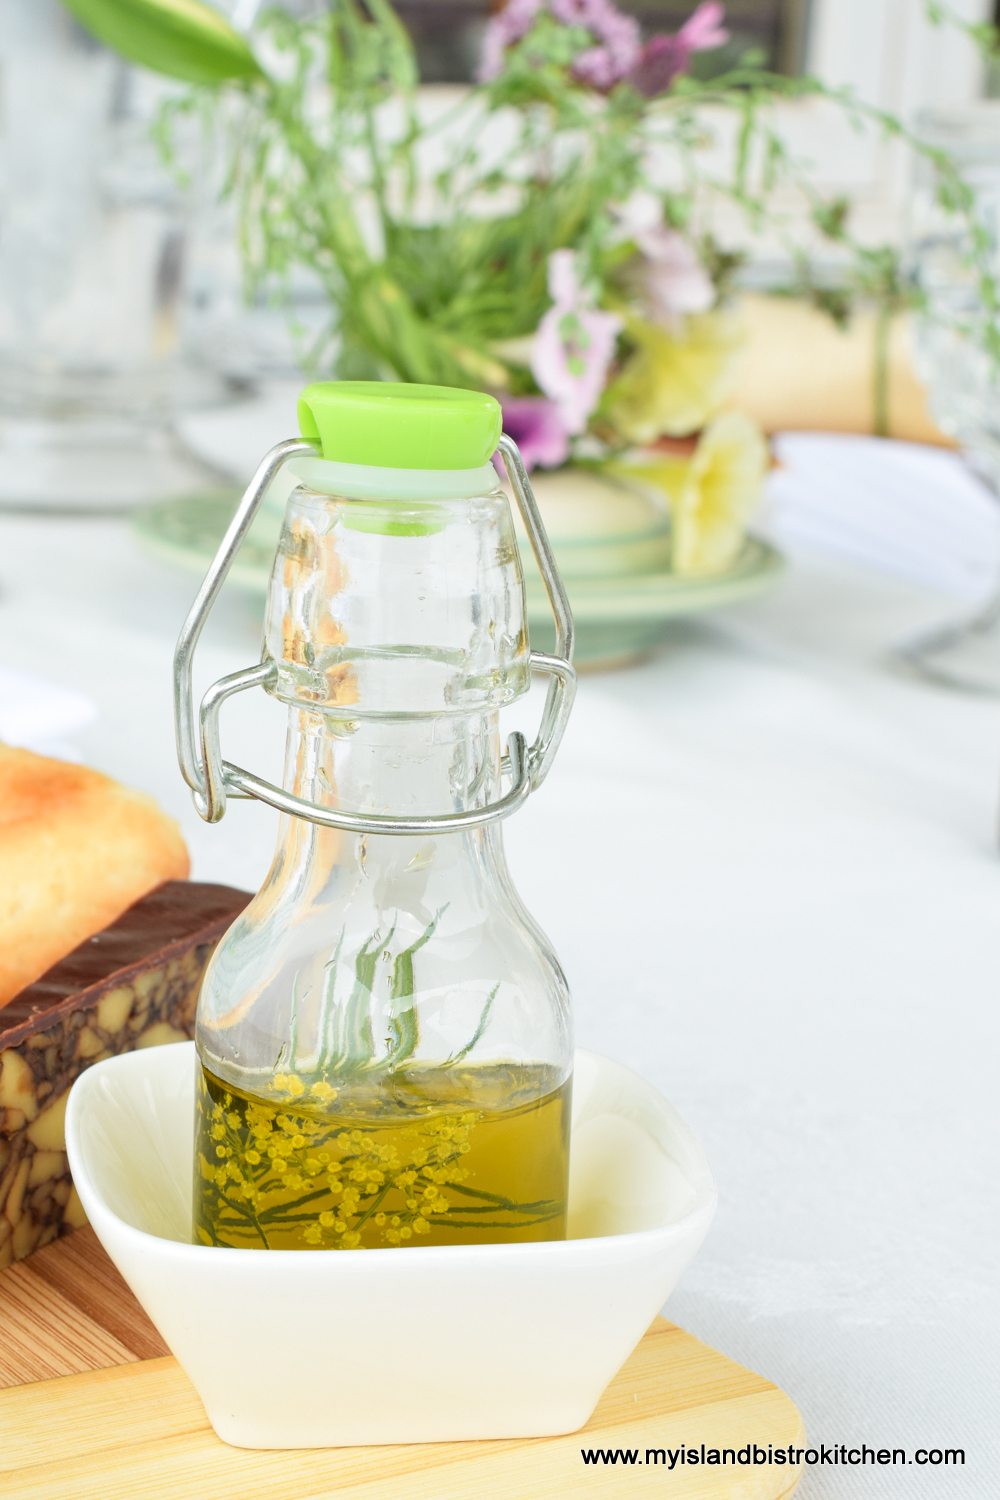 Dill-infused Olive Oil